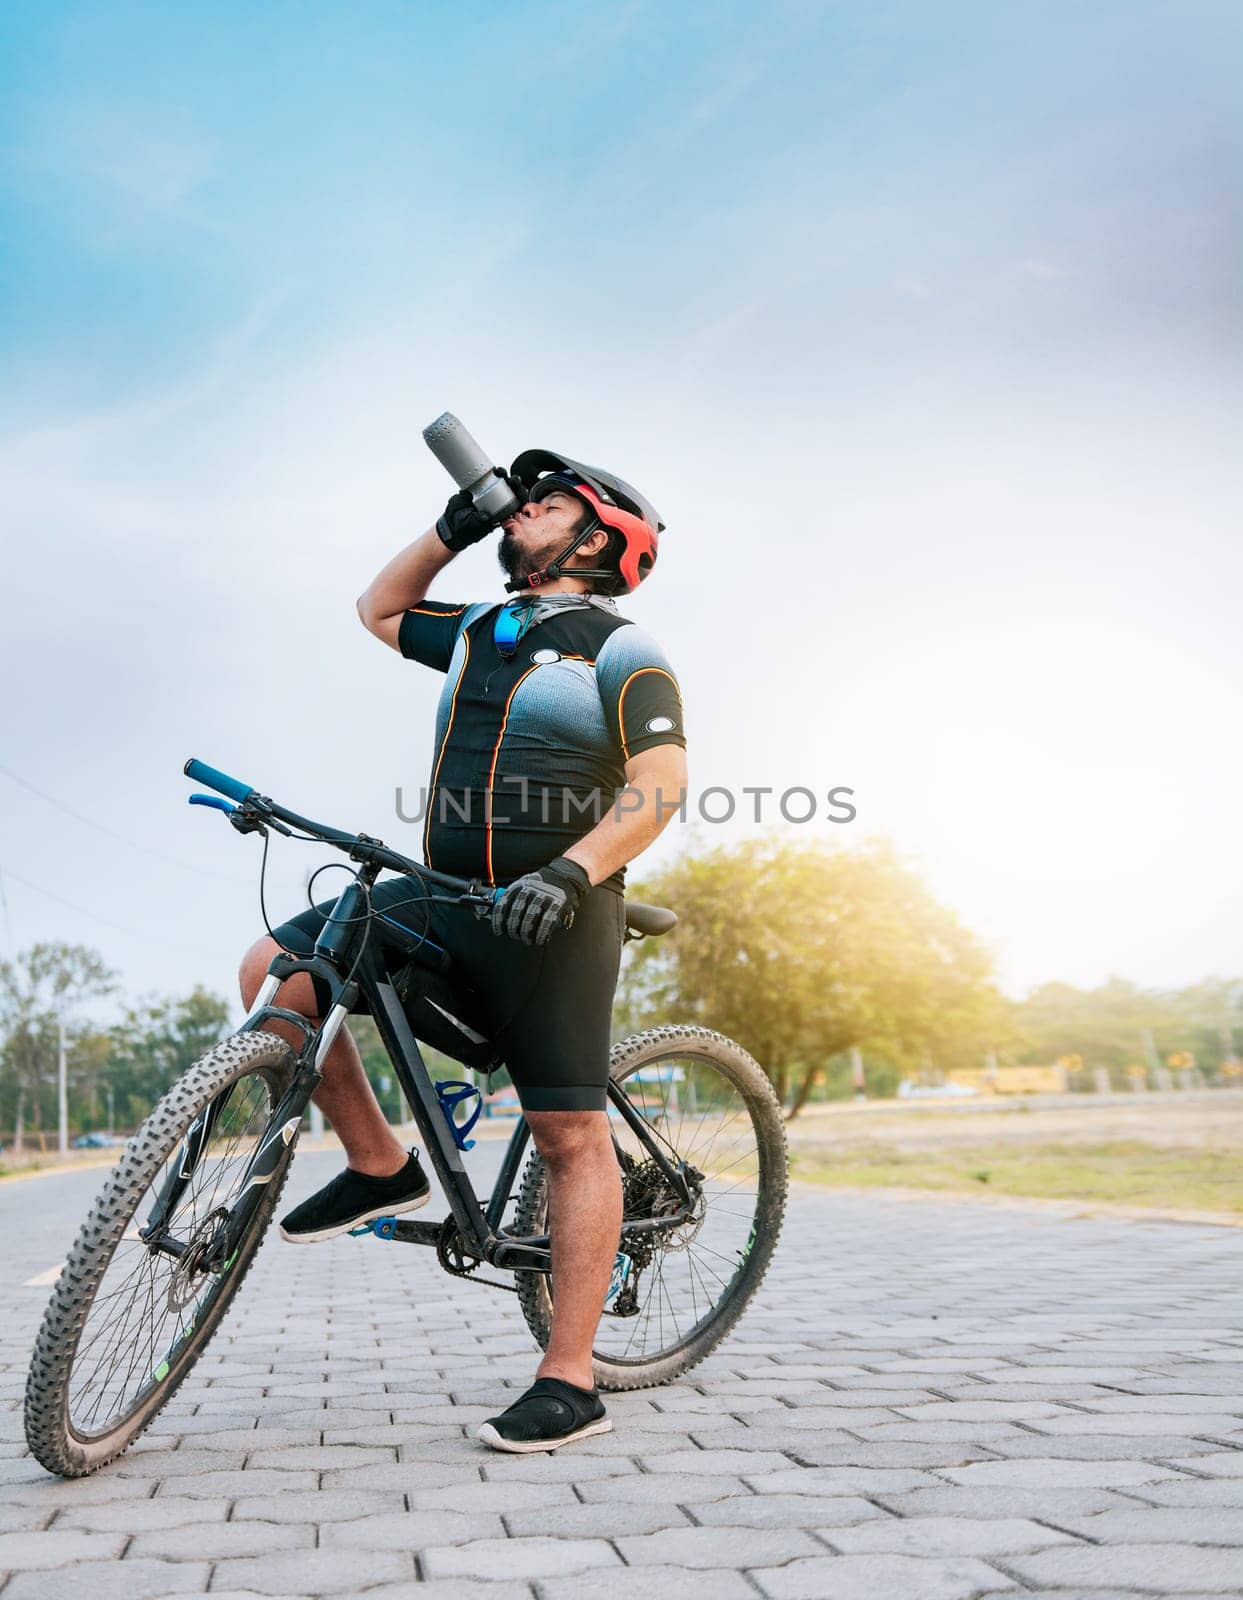 Thirsty cyclist on his bike drinking water outside. Tired cyclist drinking water outdoors, Chubby cyclist on his bike drinking water by isaiphoto